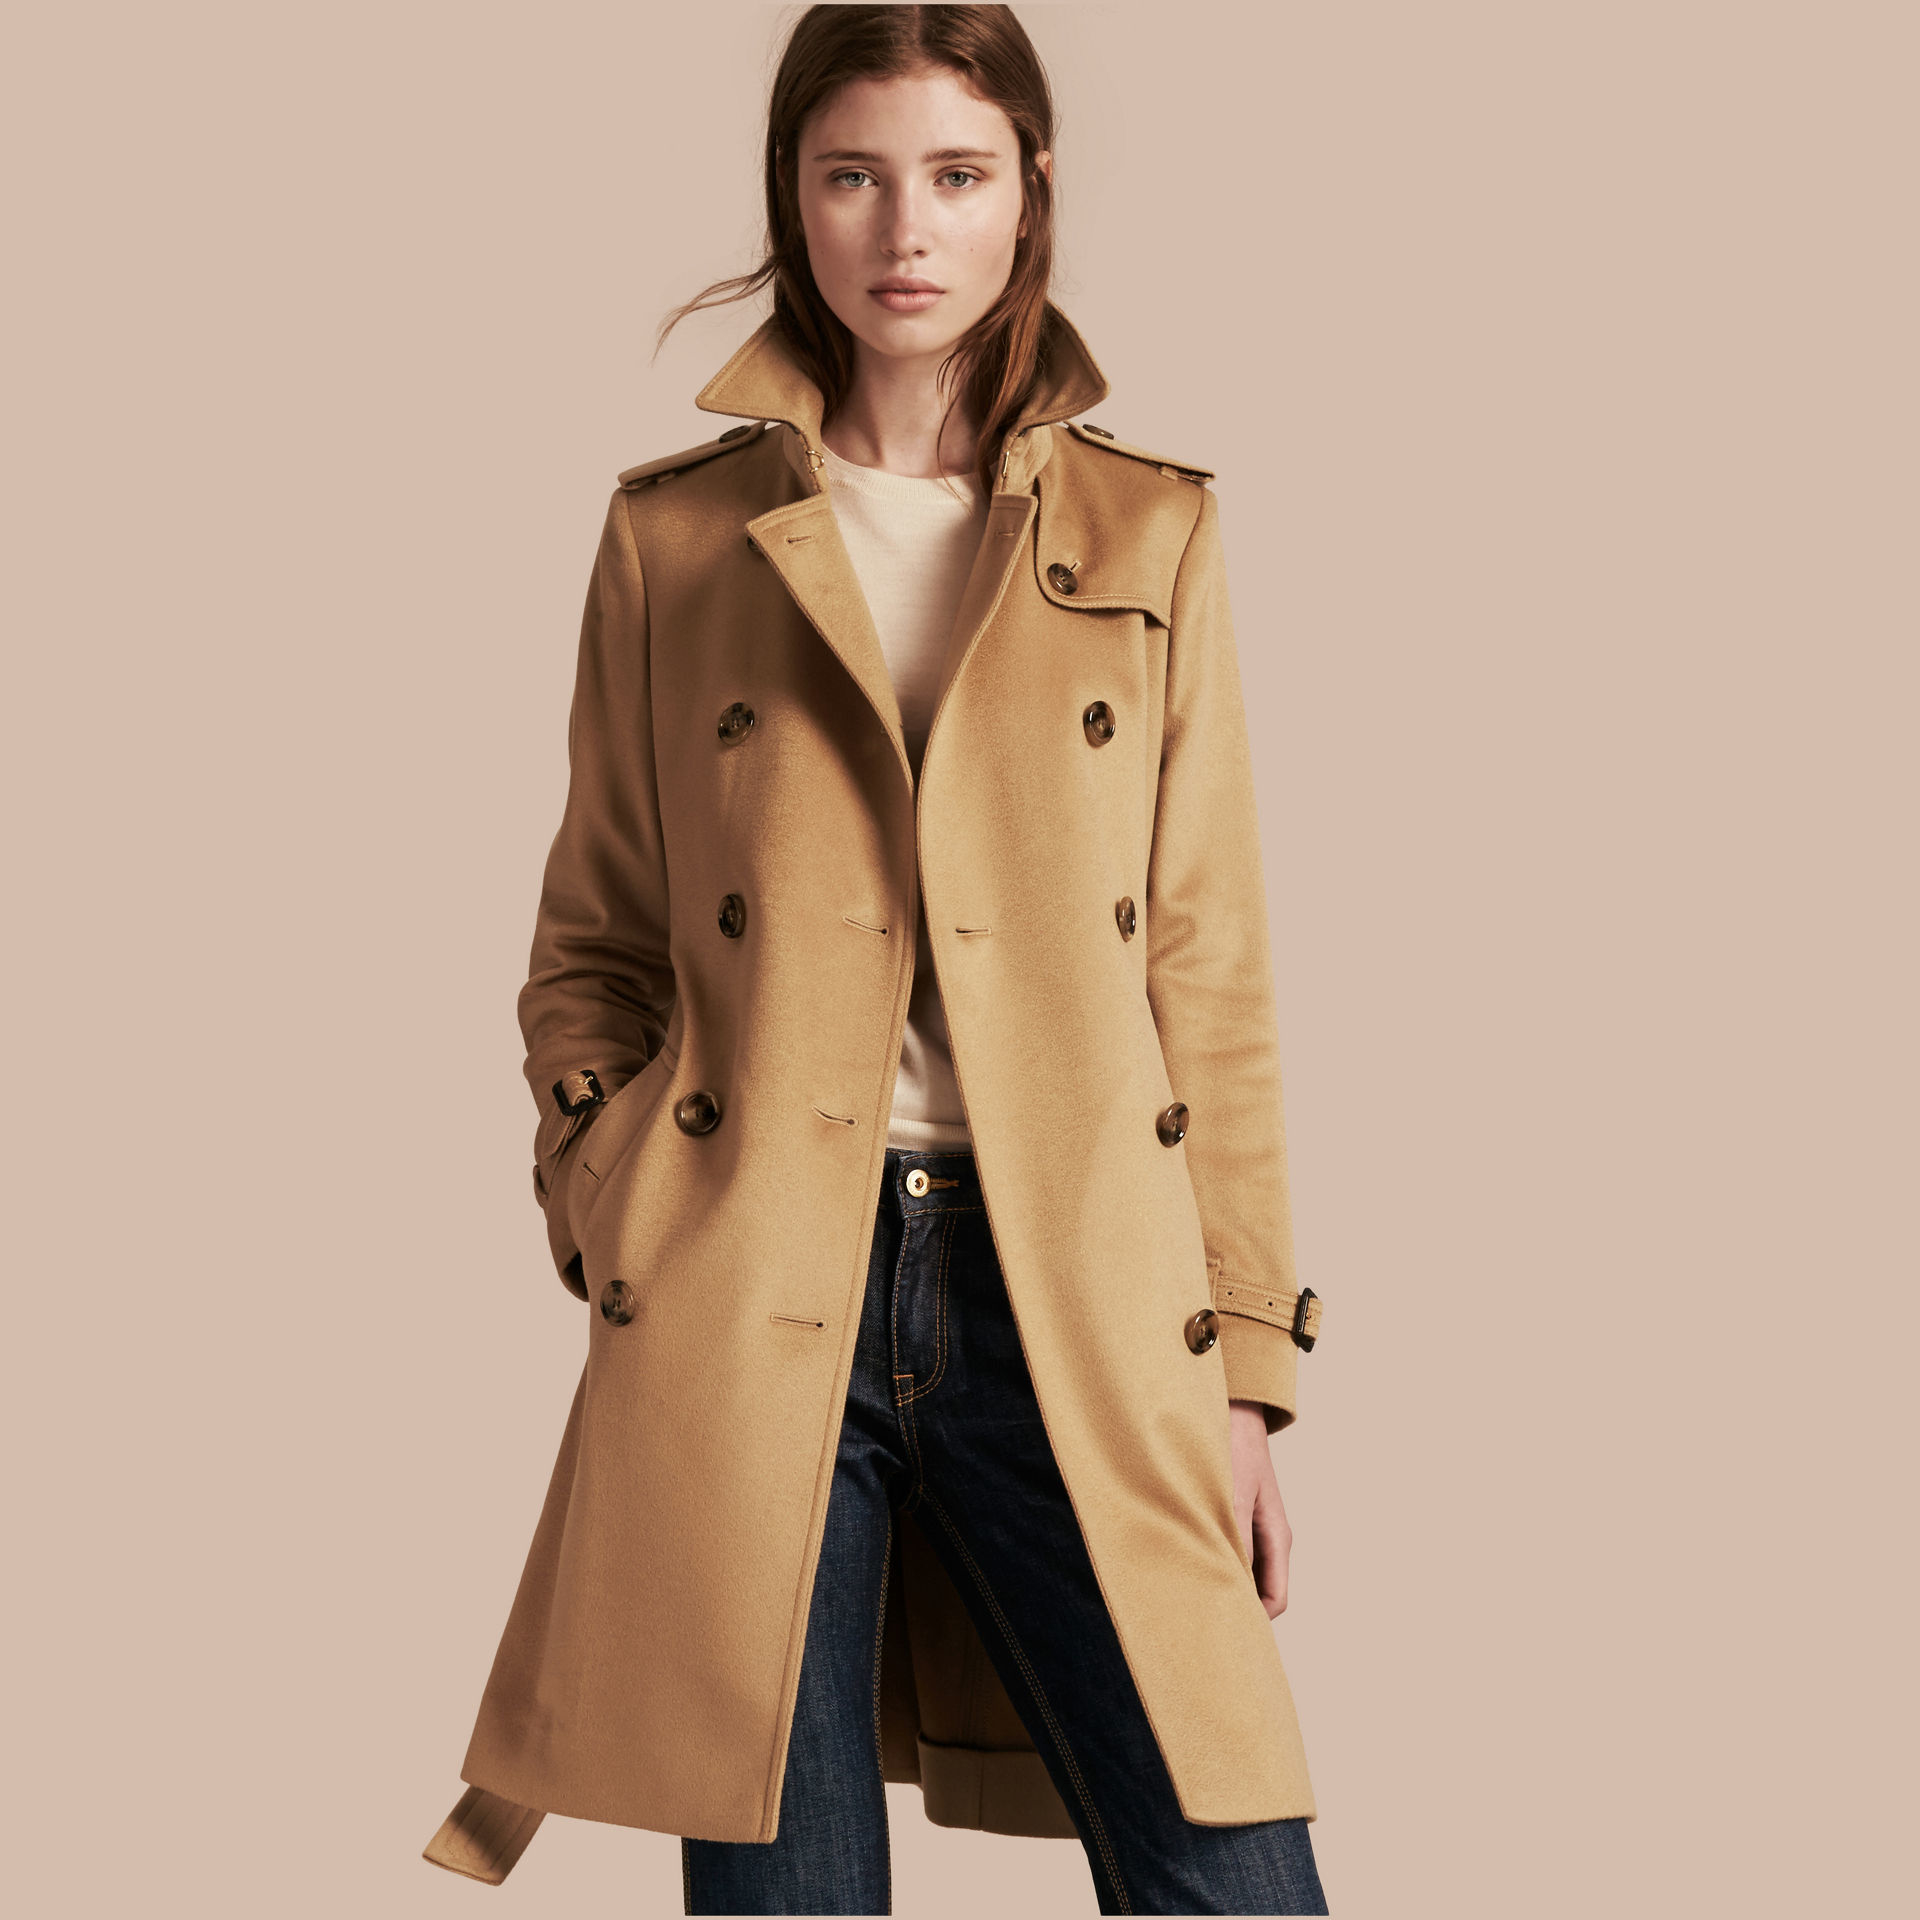 Burberry Kensington Fit Cashmere Trench Coat Camel in Natural | Lyst